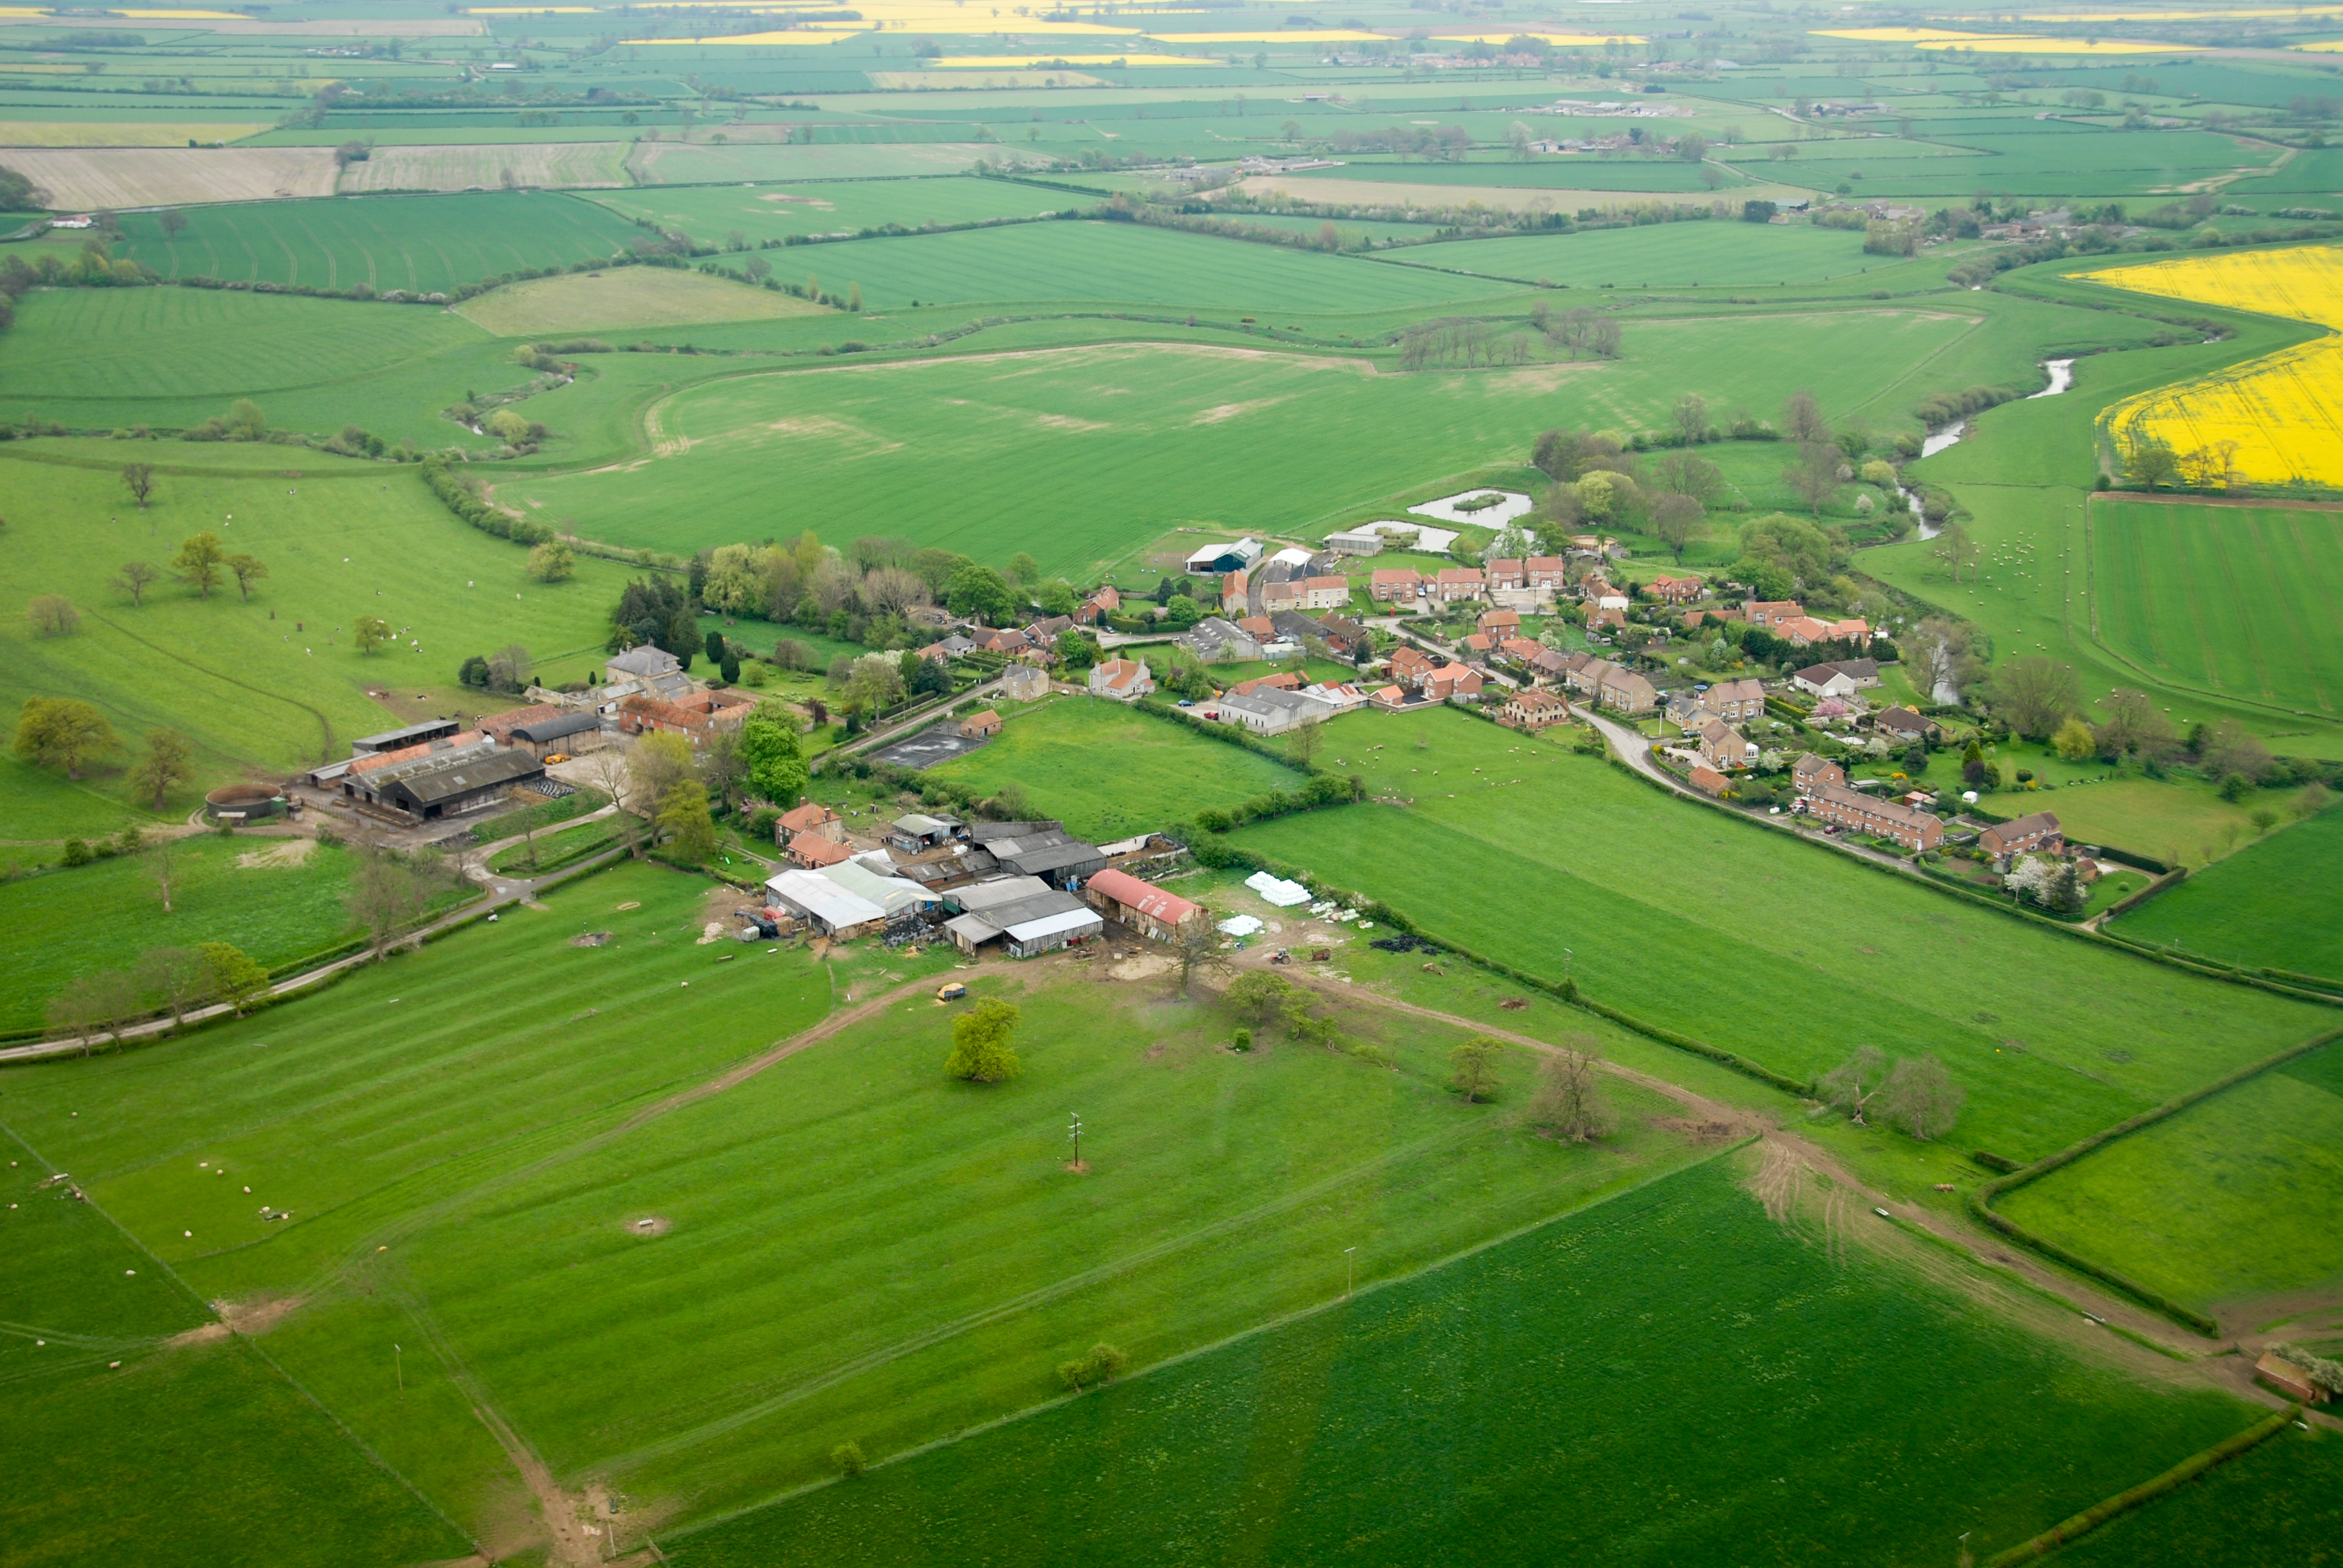 The small village of Brawby as seen from high above Brawby Grange